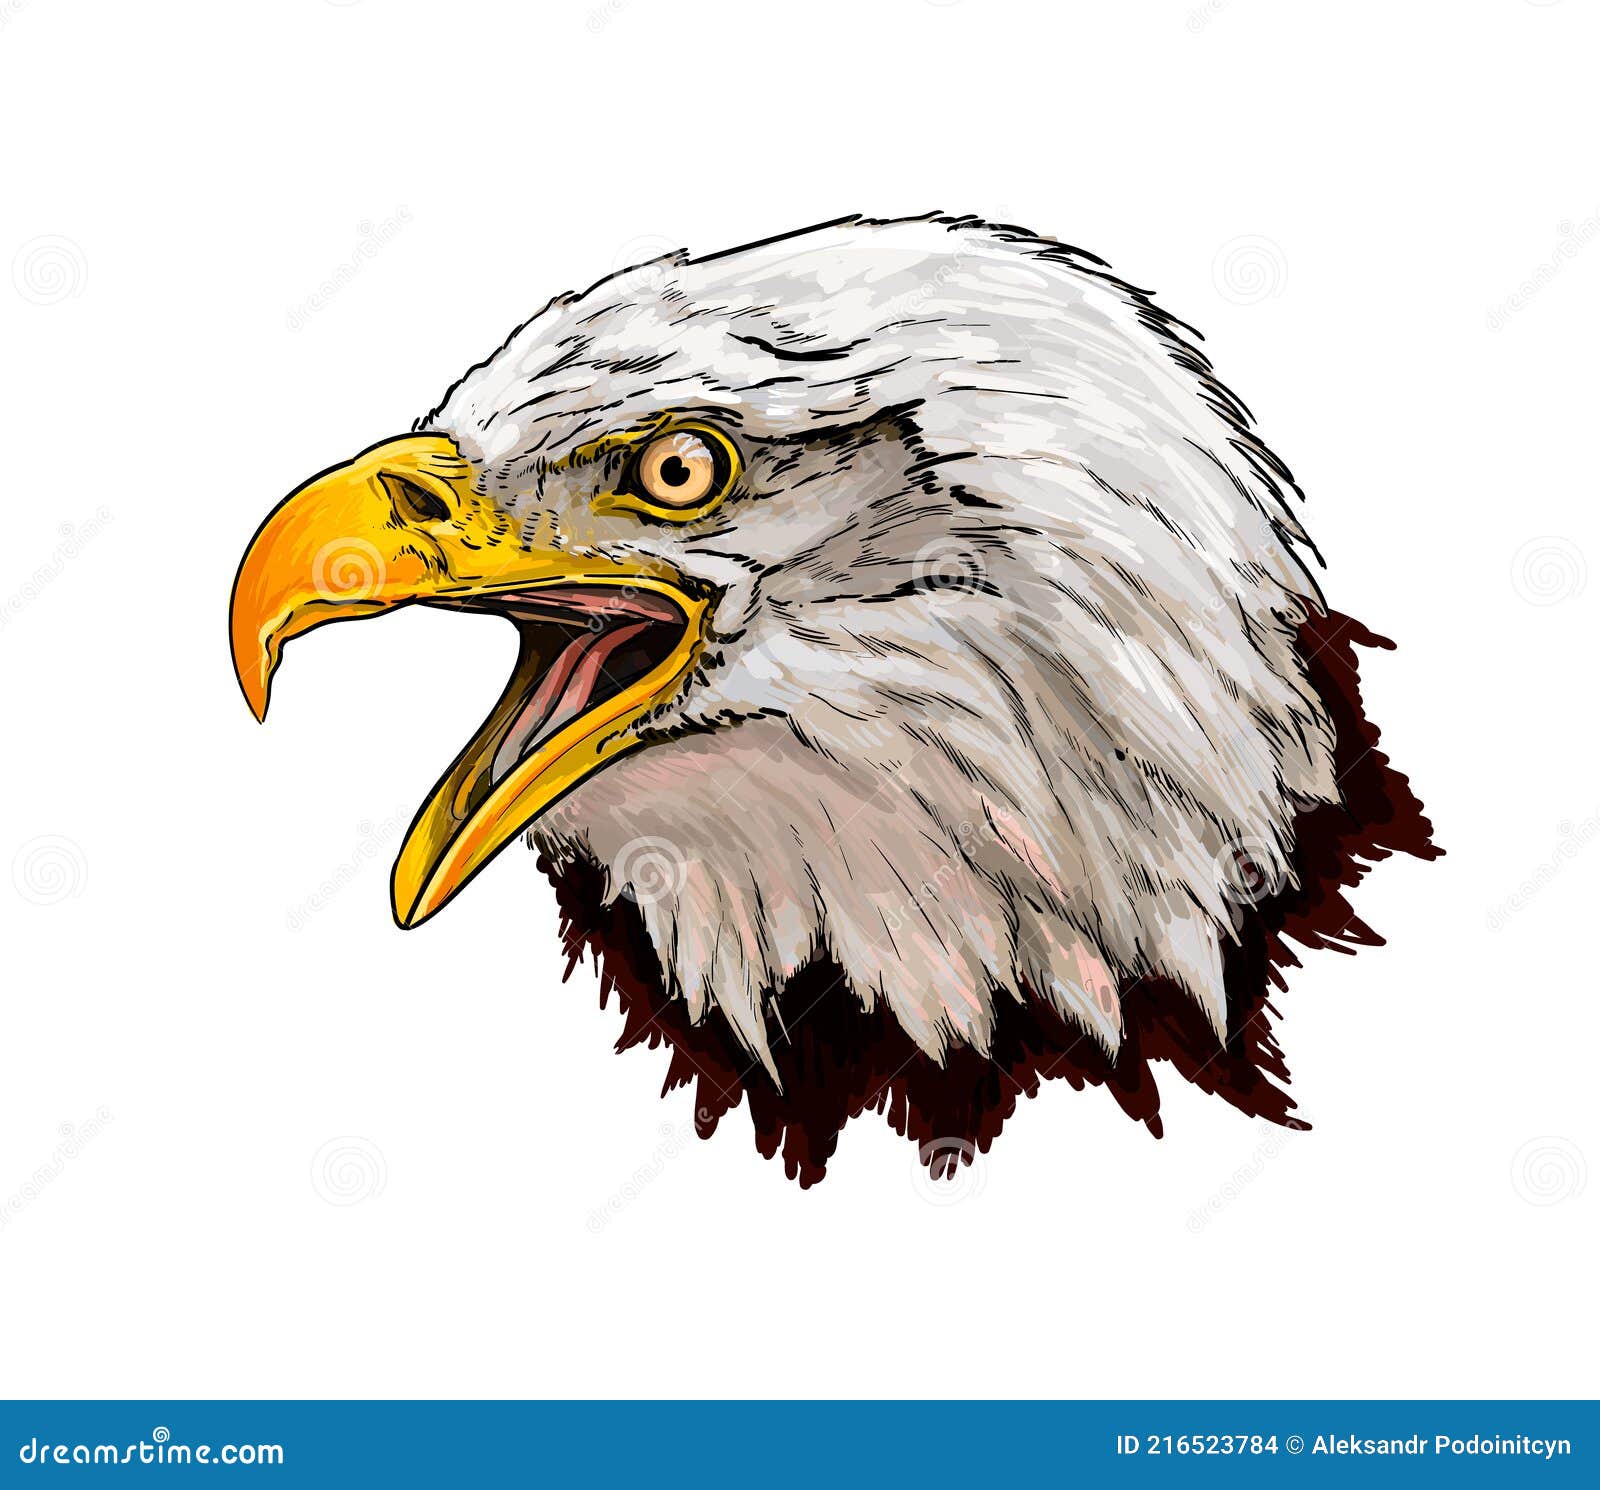 20 Easy Eagle Drawing Ideas - How To Draw An Eagle - Blitsy